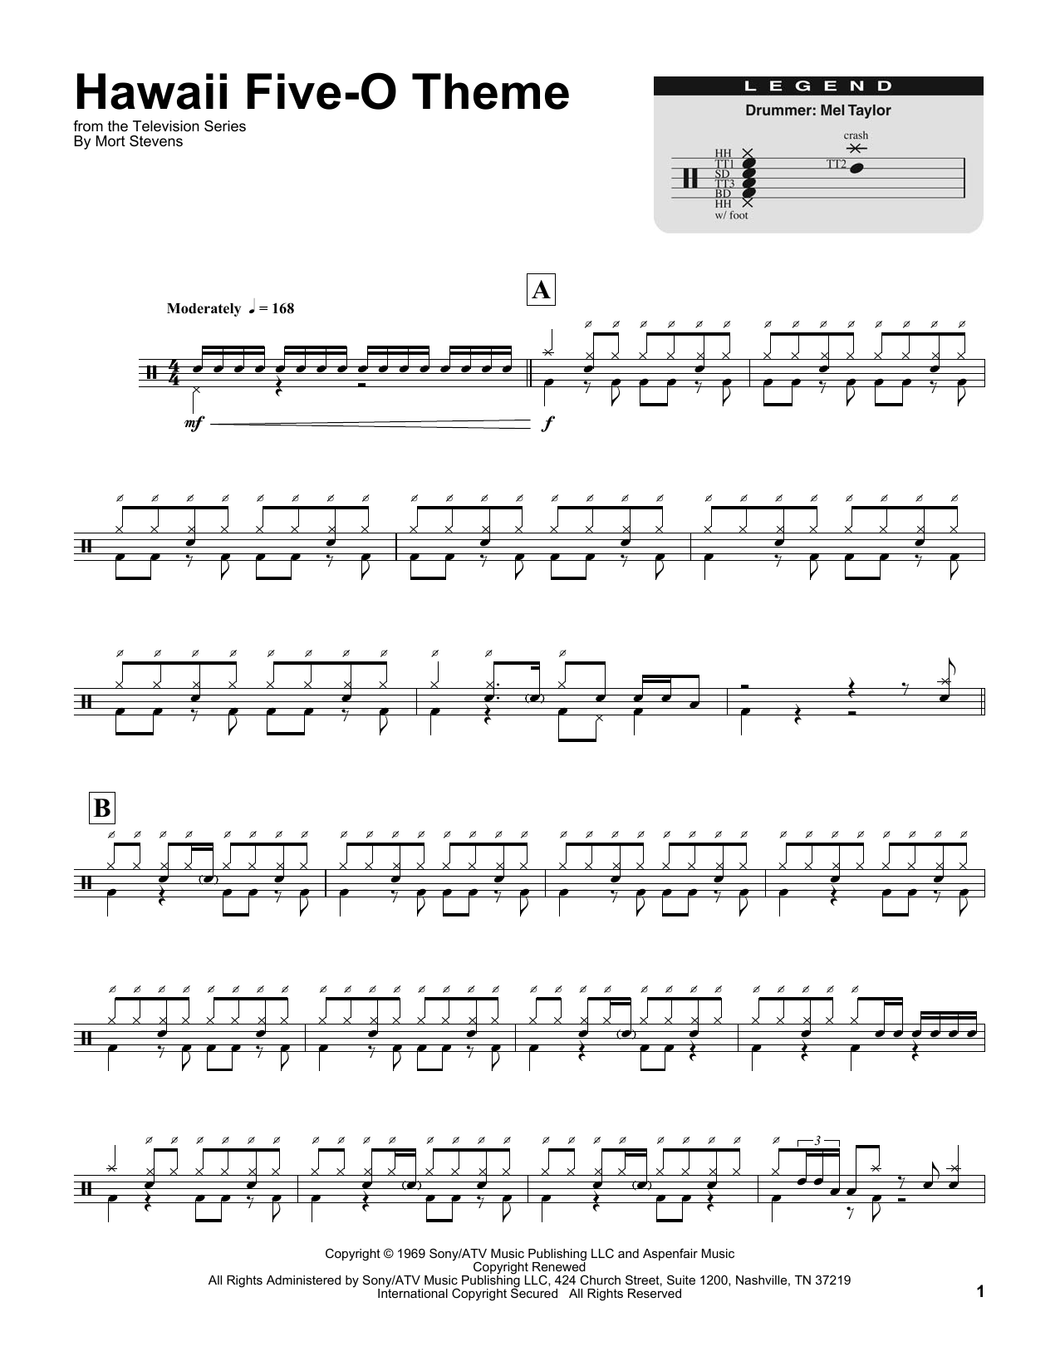 Hawaii Five O - The Ventures - Full Drum Transcription / Drum Sheet Music - SheetMusicDirect DT